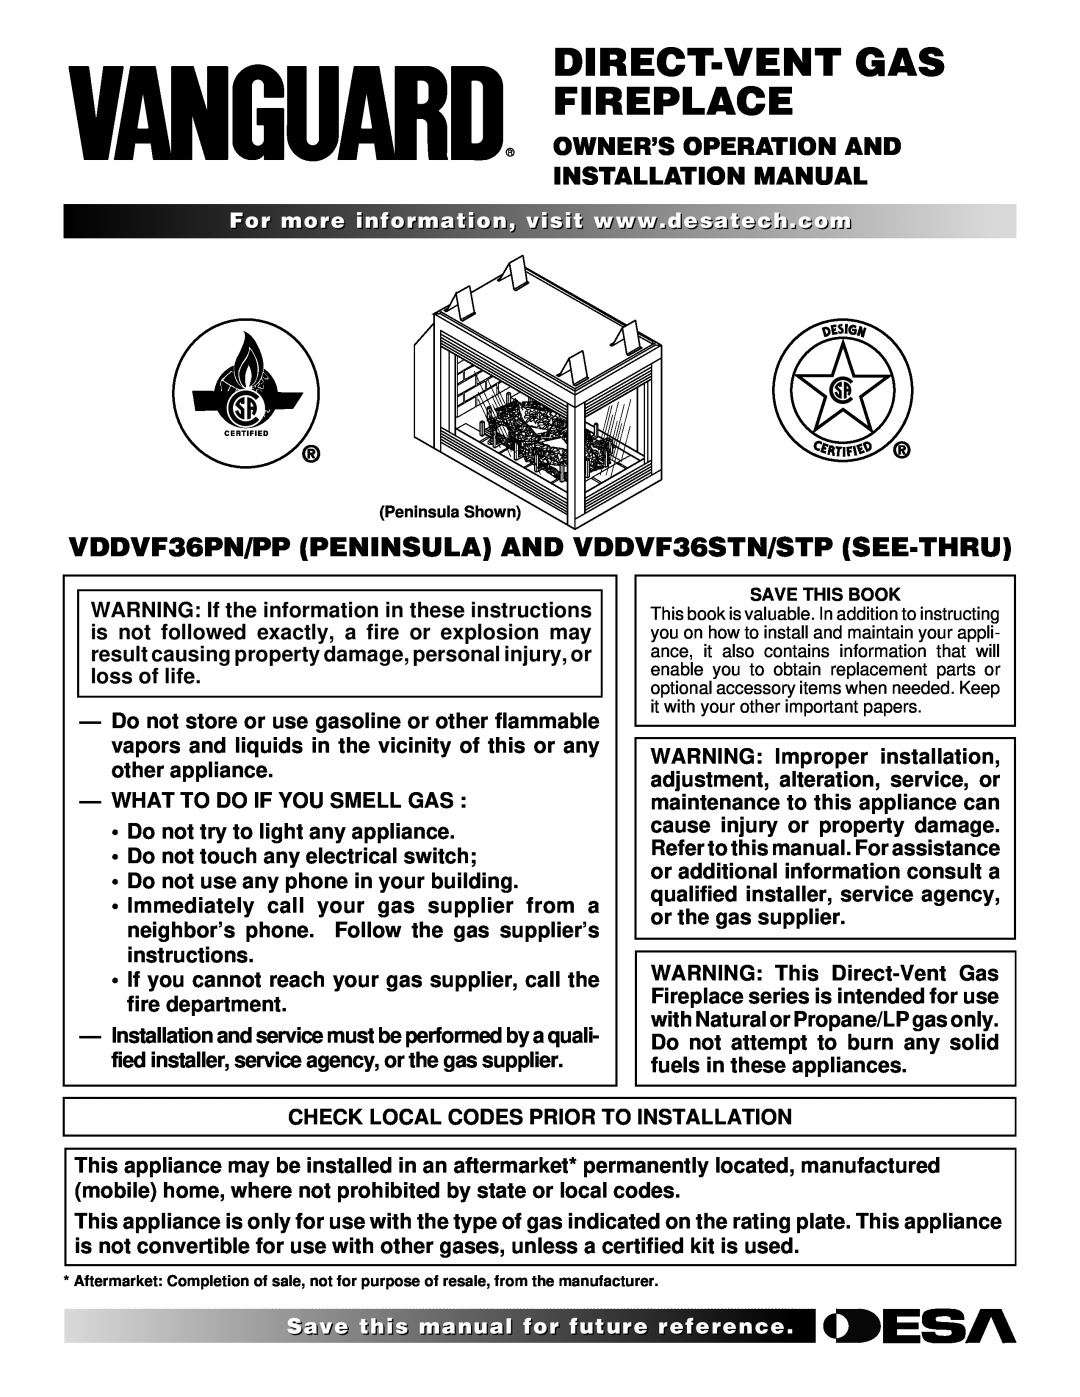 Desa VDDVF36STN/STP, VDDVF36PN/PP installation manual What To Do If You Smell Gas, Do not try to light any appliance 